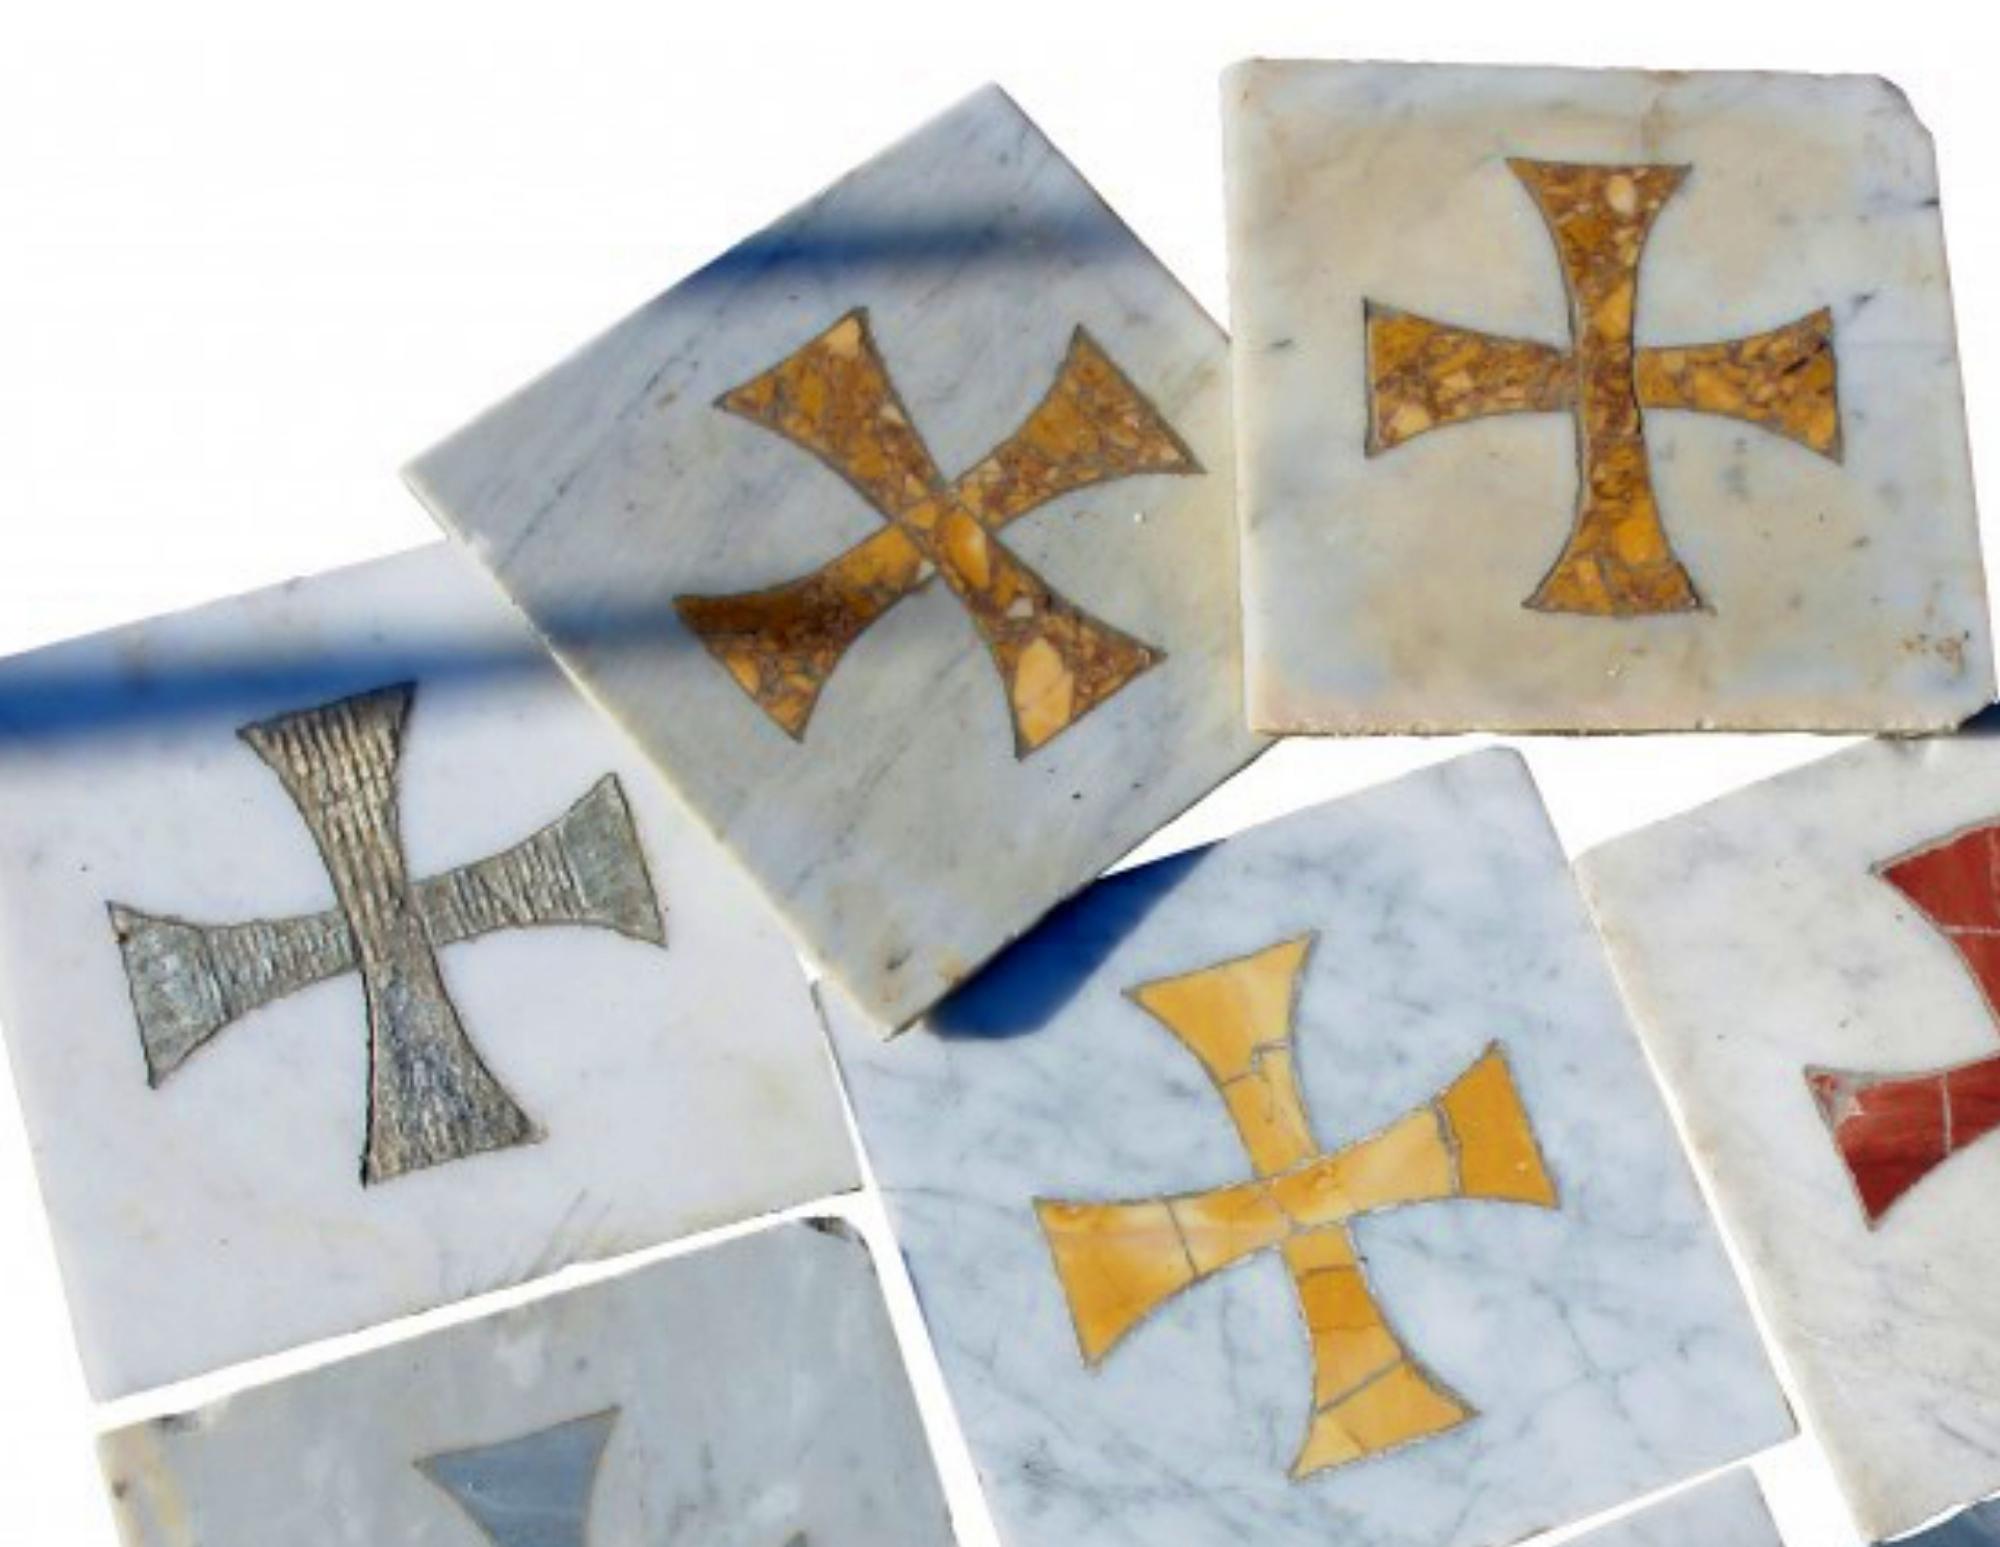 Ancient malta cross marble various colors 19th Century Carrara marble.
Measures: height 30cm
width 30cm
Weight 8Kg
Very good condition

The price is for which one
The price of transport is the same for maximum 5 pieces.